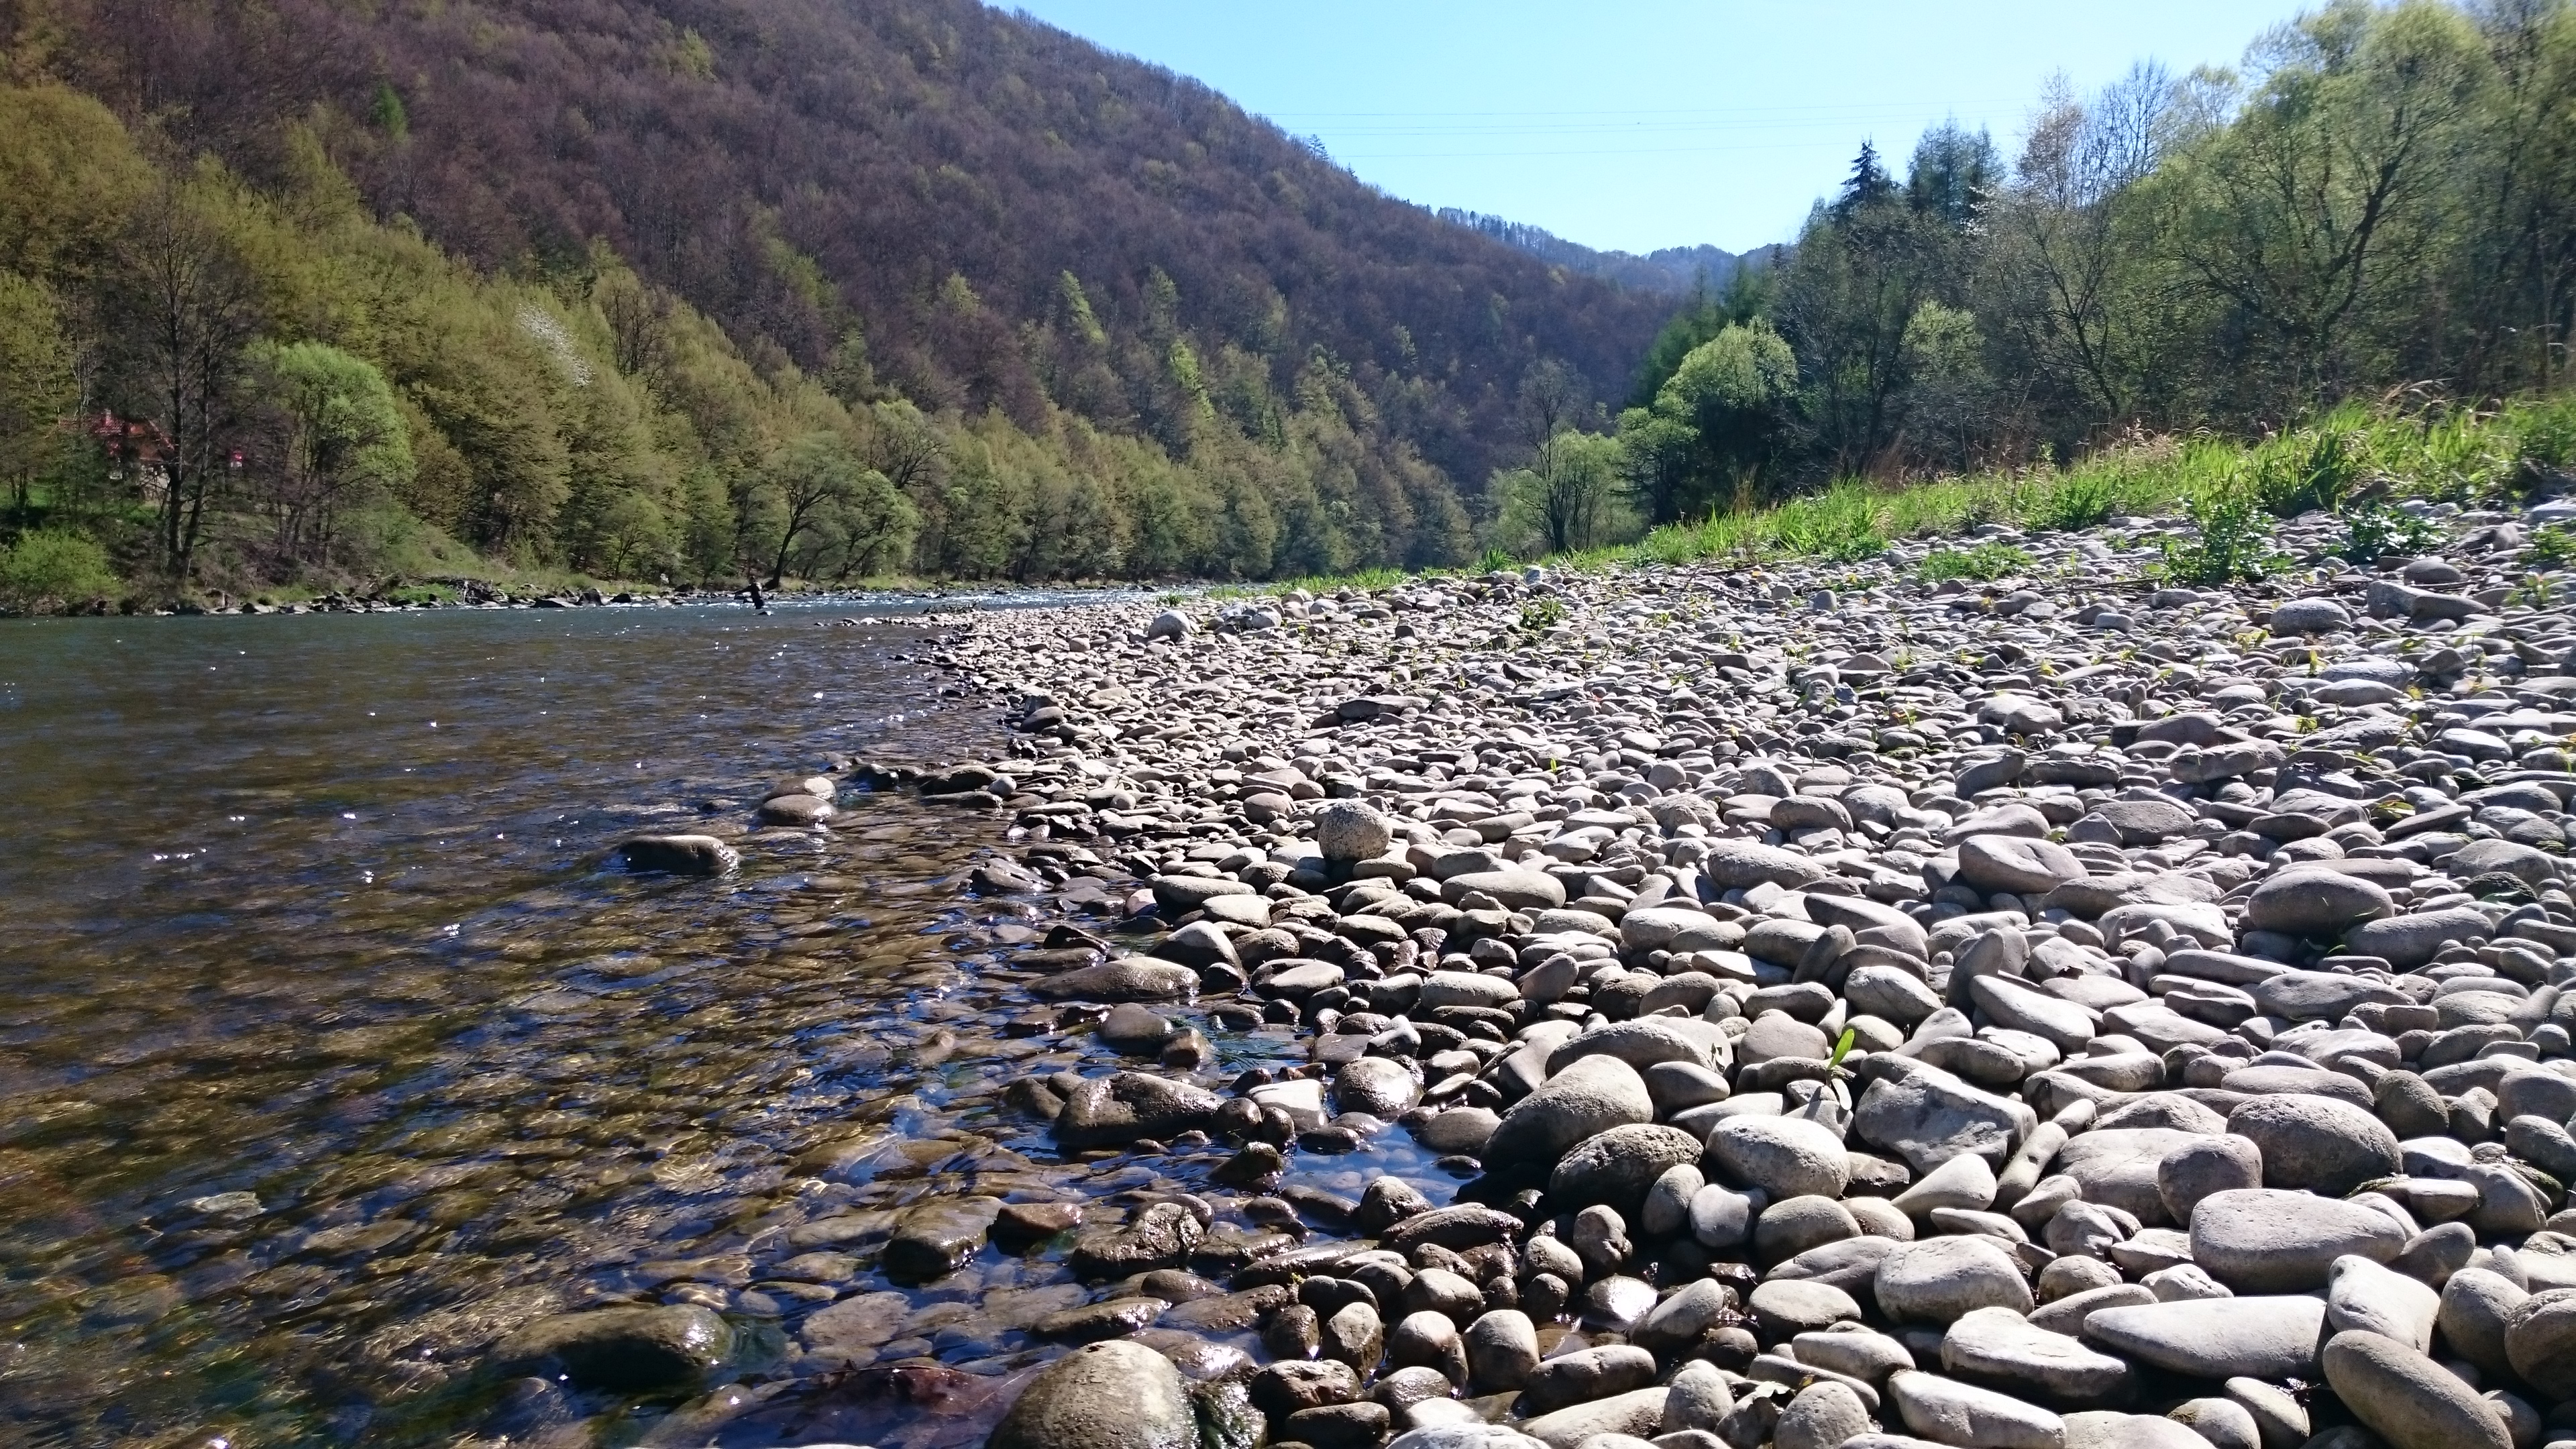 Great streamer fishing place - also good for Hucho-hucho - Dunajec River - Poland